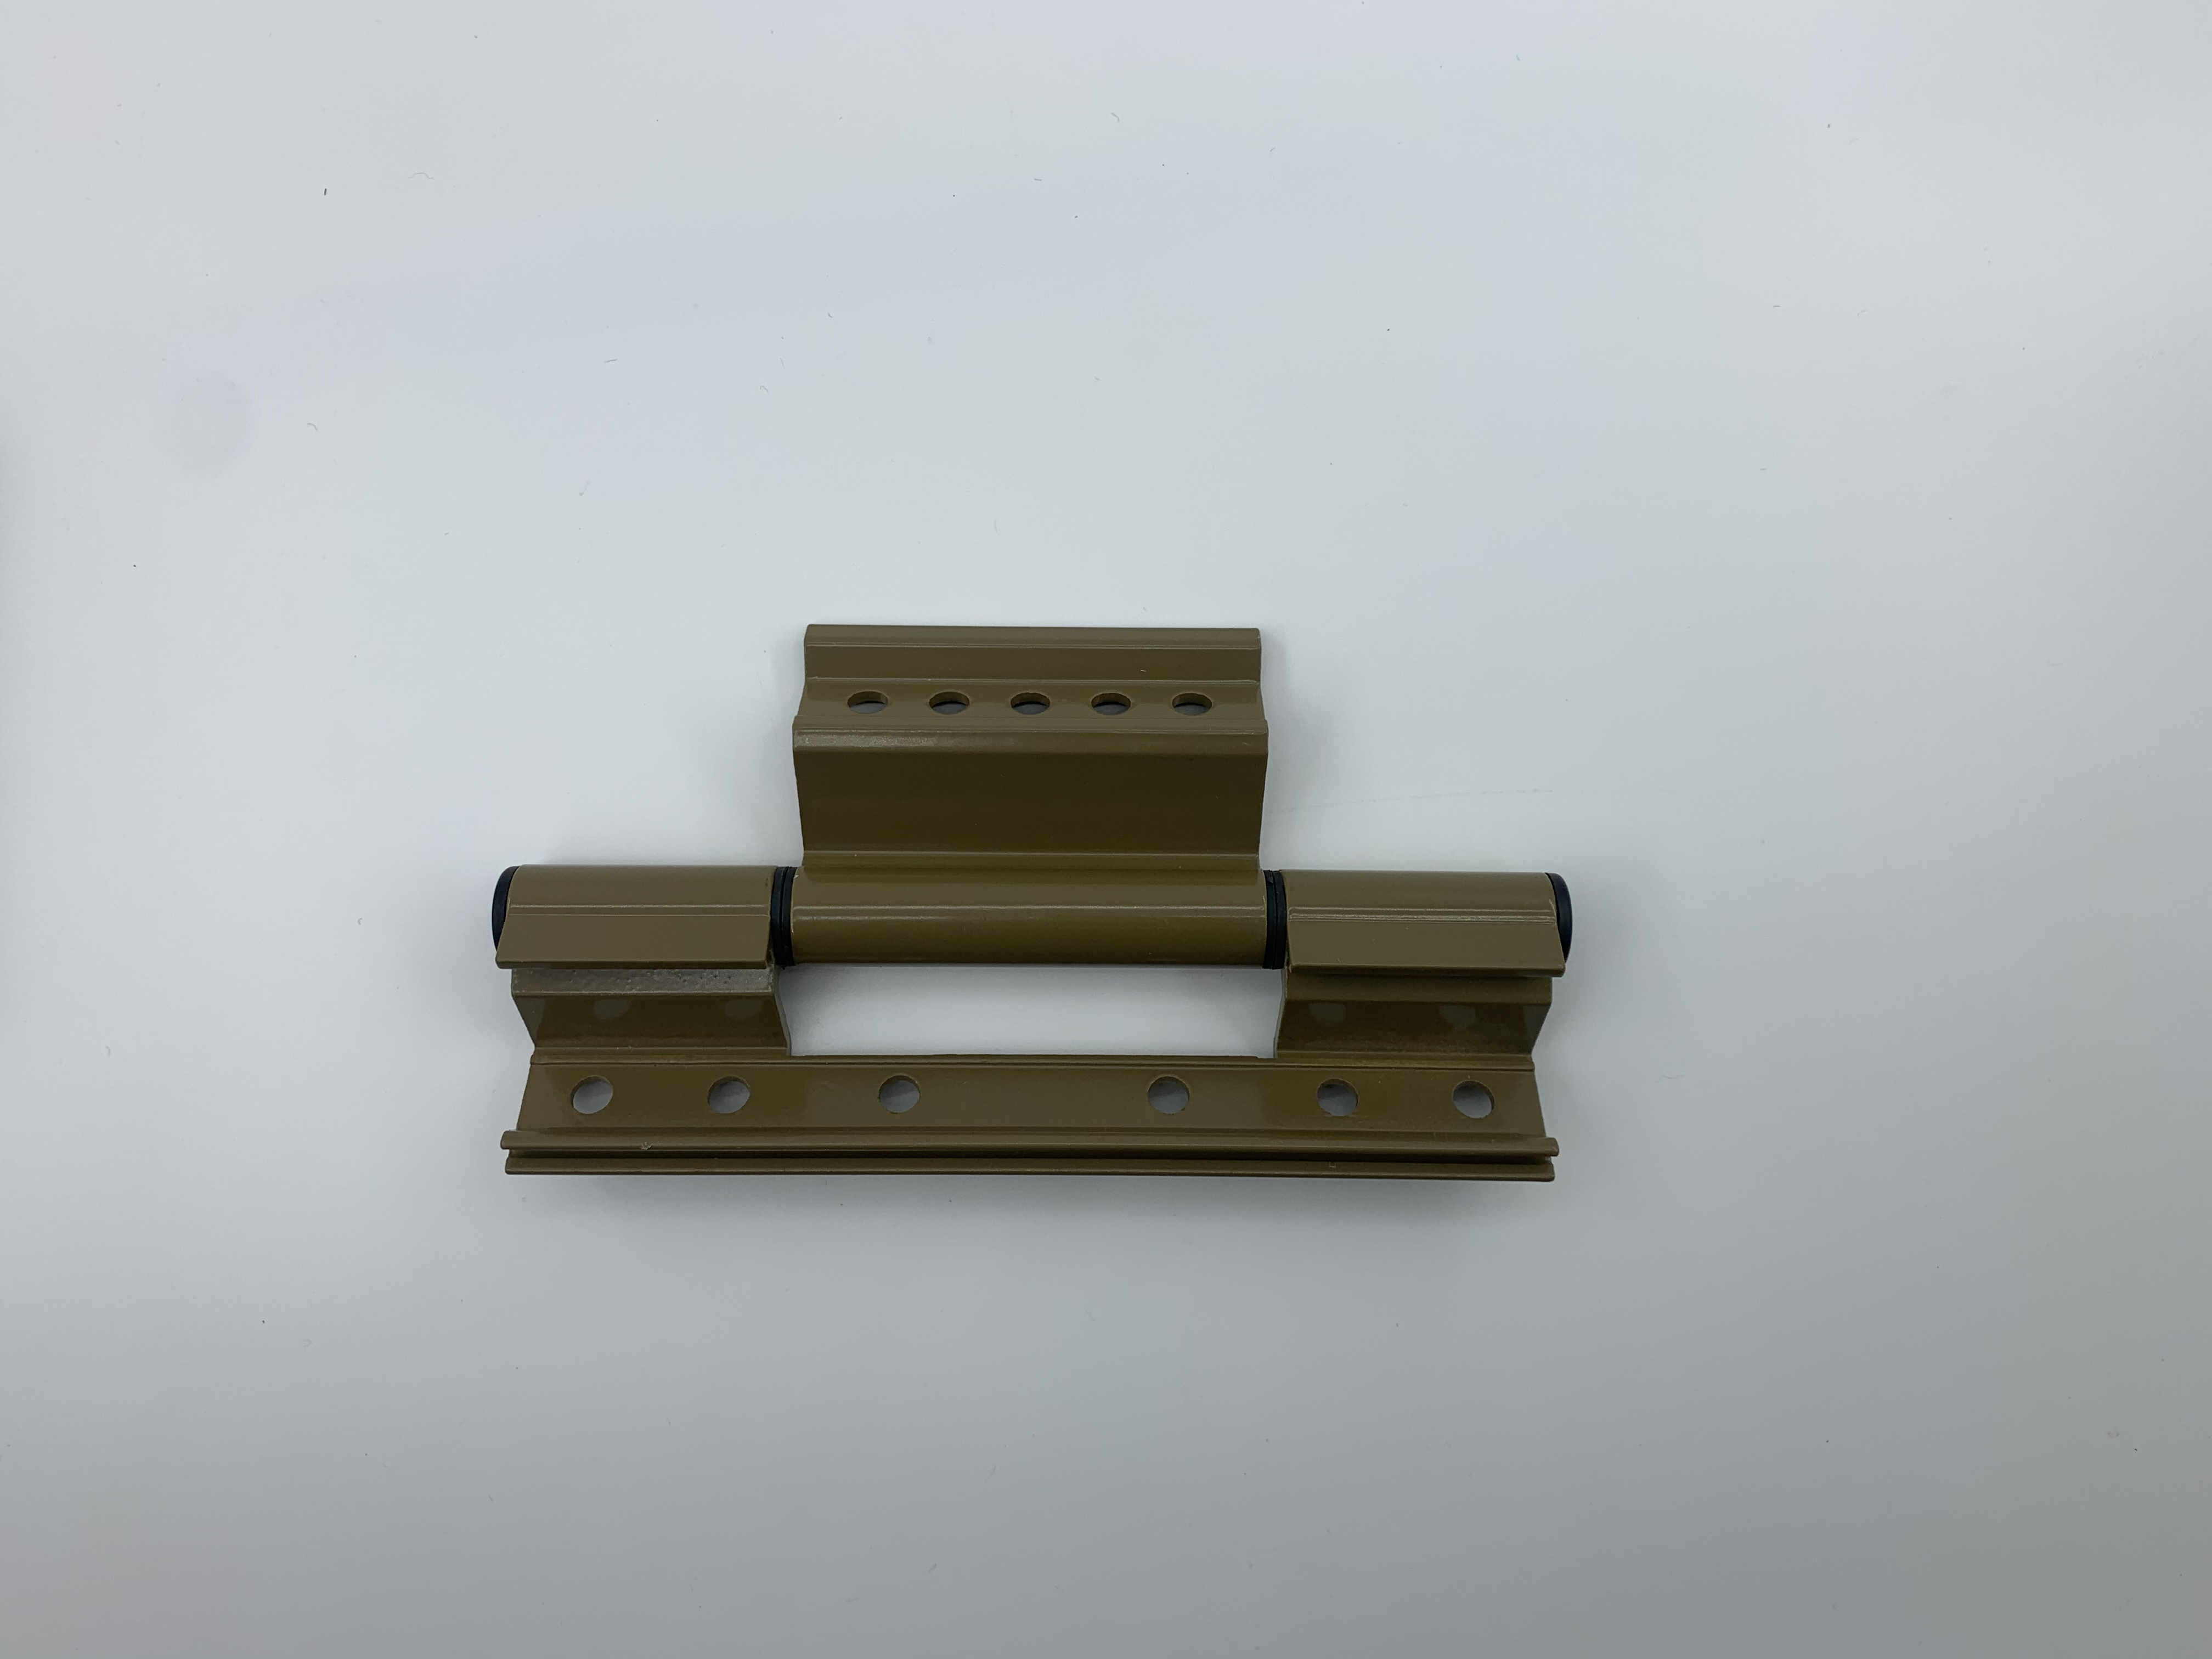 Wind-proof Hinges Customization of machining products CNC Service Fabrication